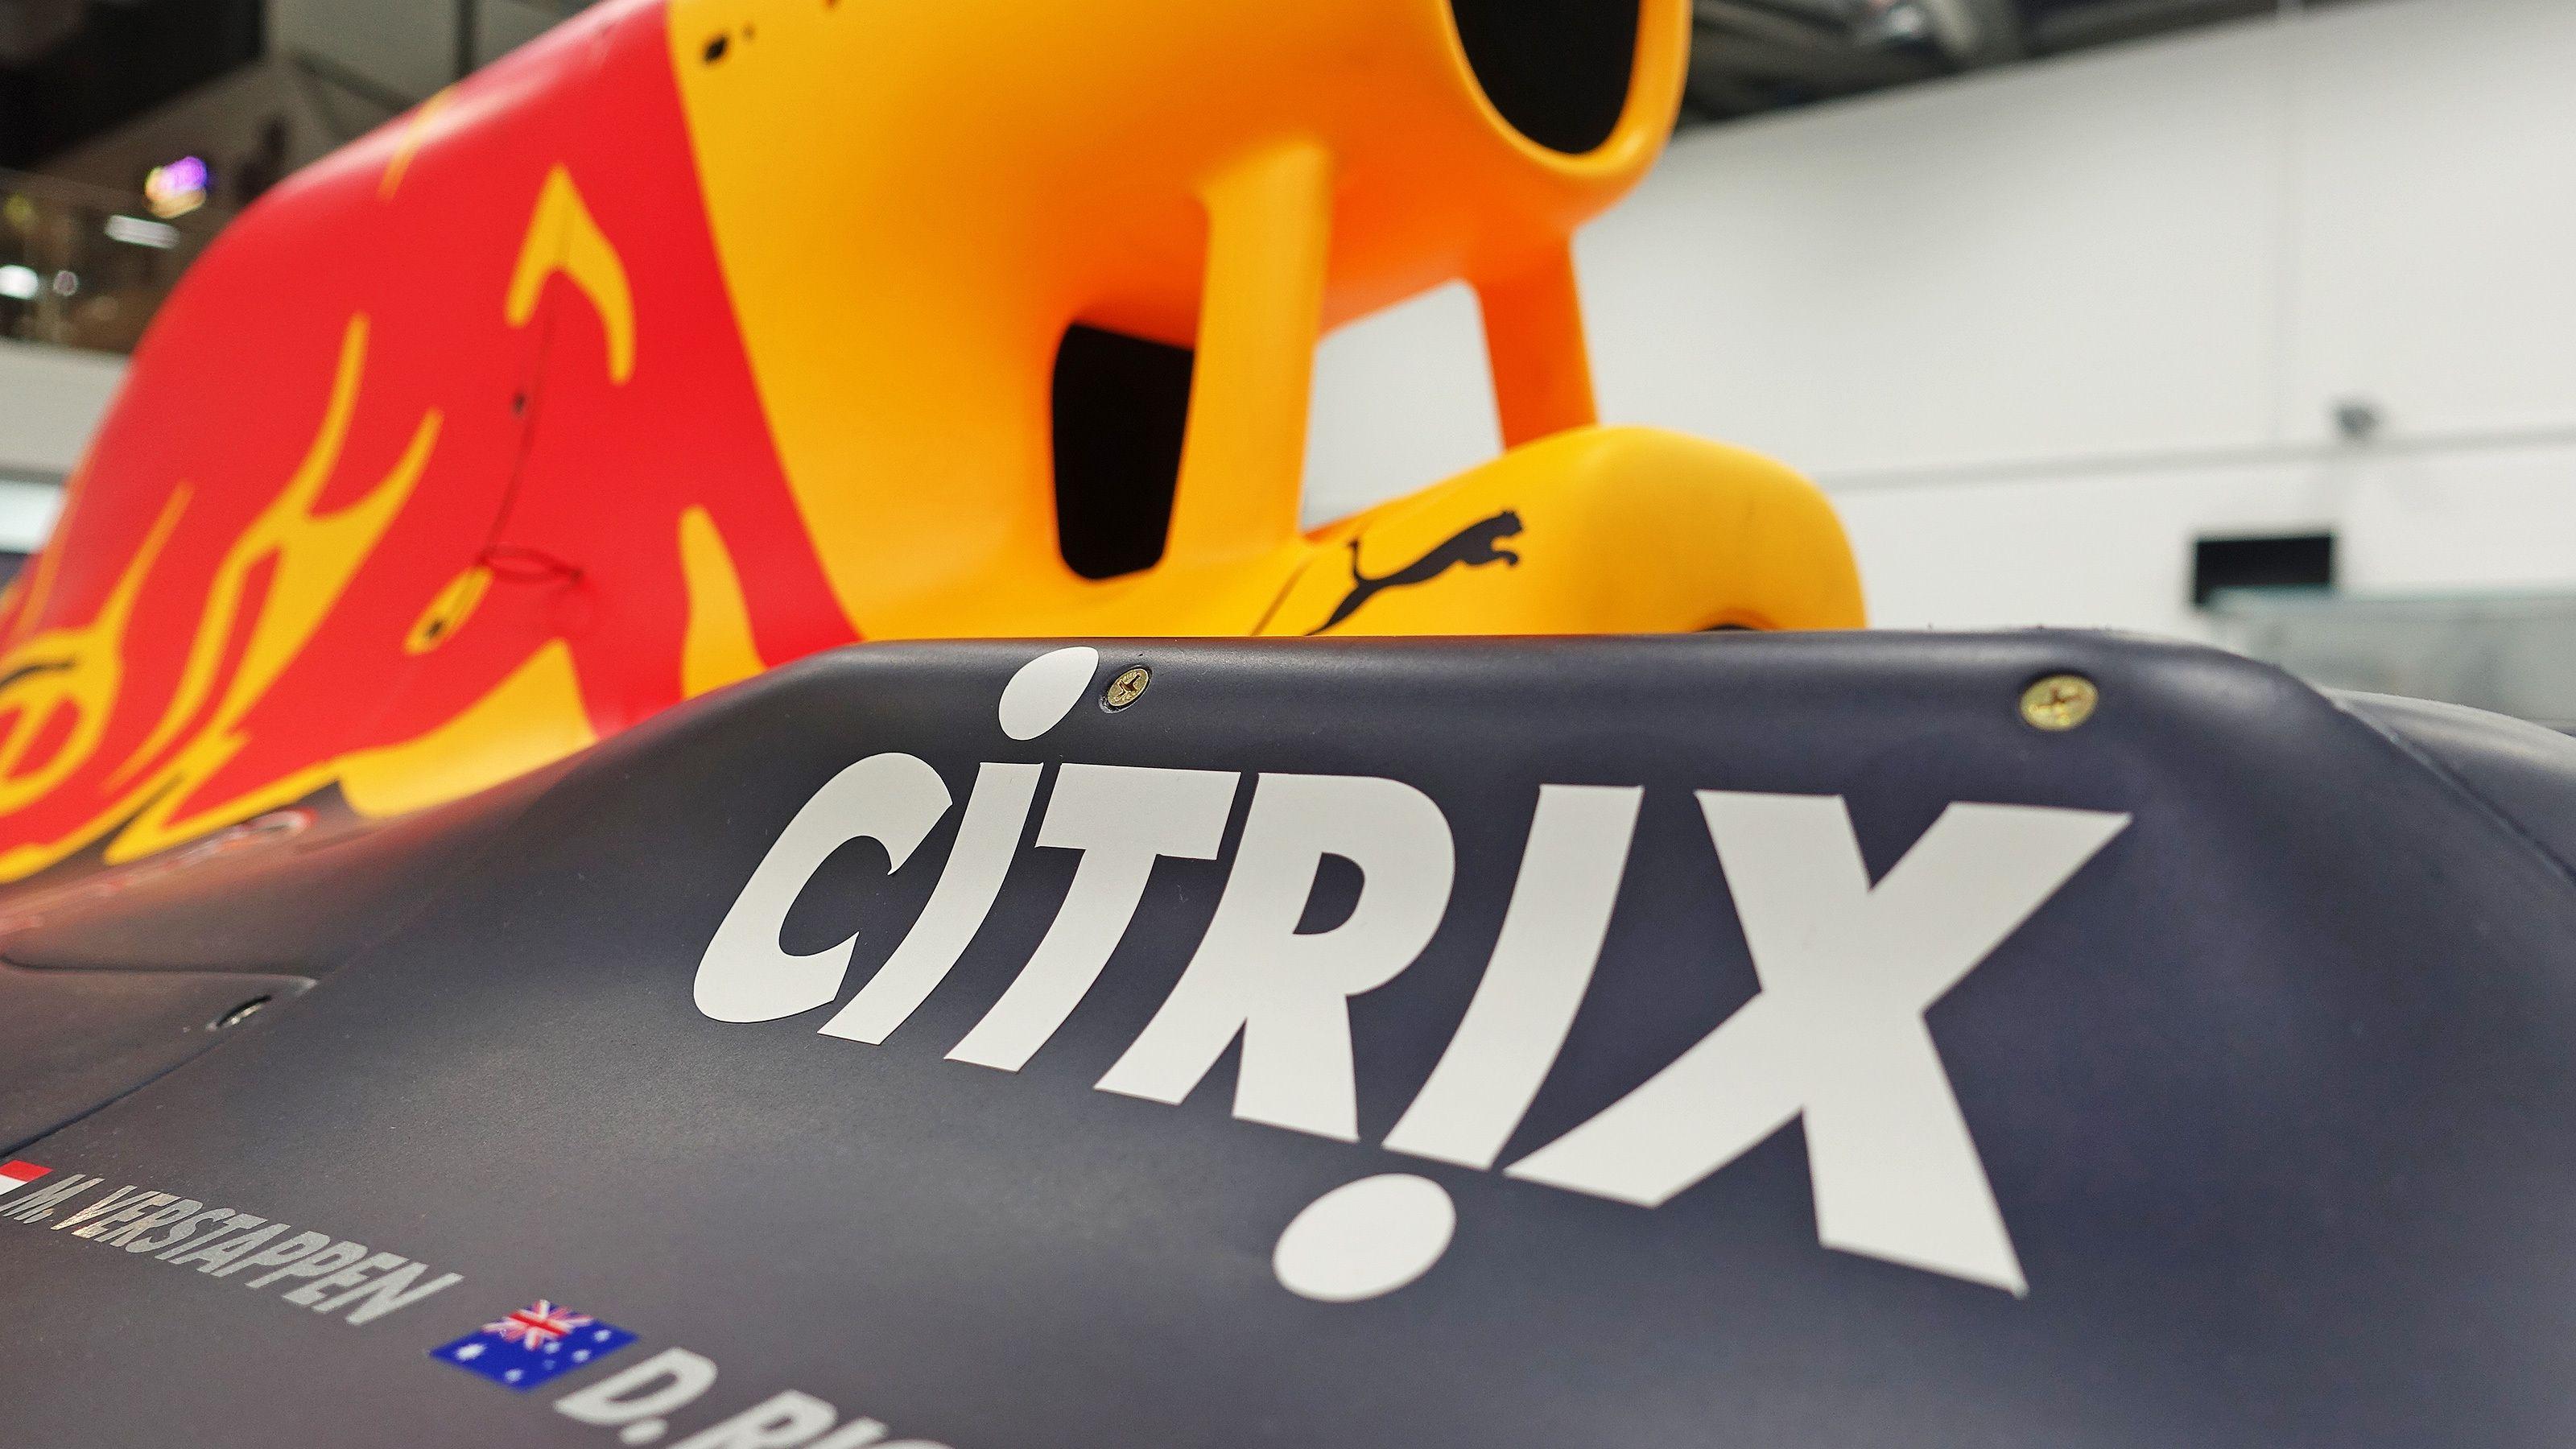 Citrix Logo - Citrix to Become Red Bull Racing Innovation Partner | Business Wire